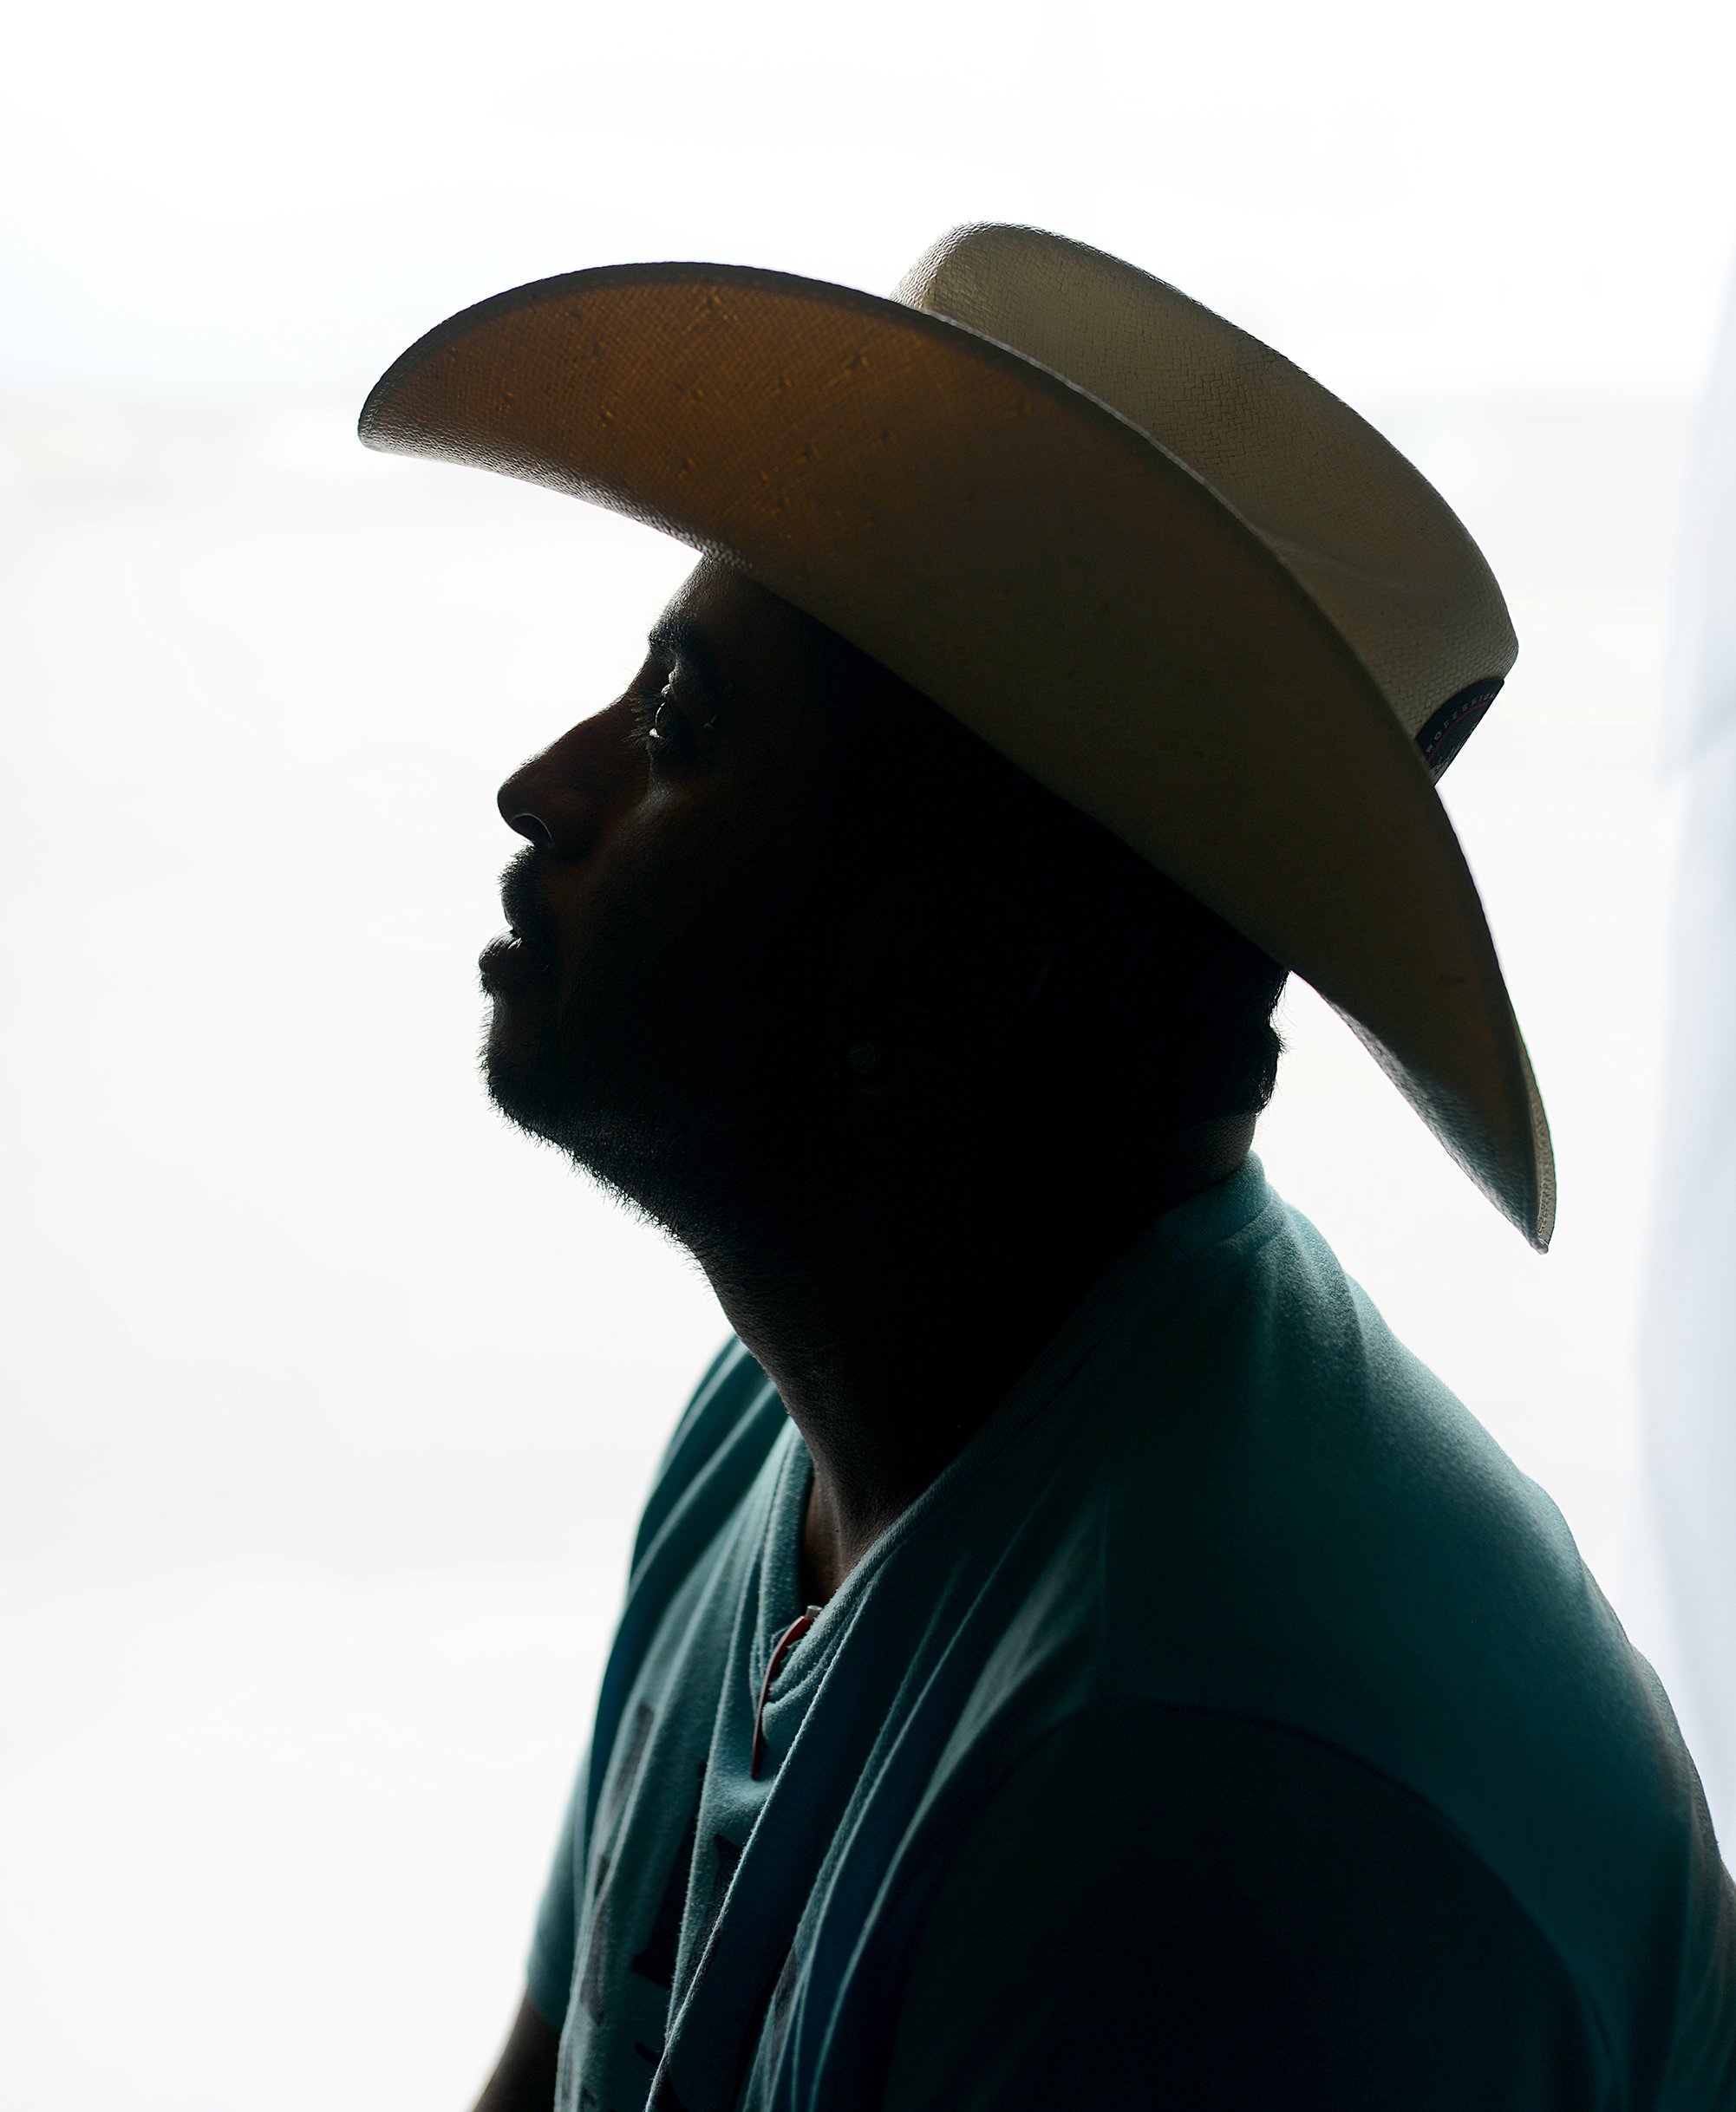 A Mexican farmworker in Plainview on an H-2A visa sits for a portrait. Because an H-2A visa is bound to one employer who controls housing and worksites, these farmworkers are uniquely at risk of being forced into labor.